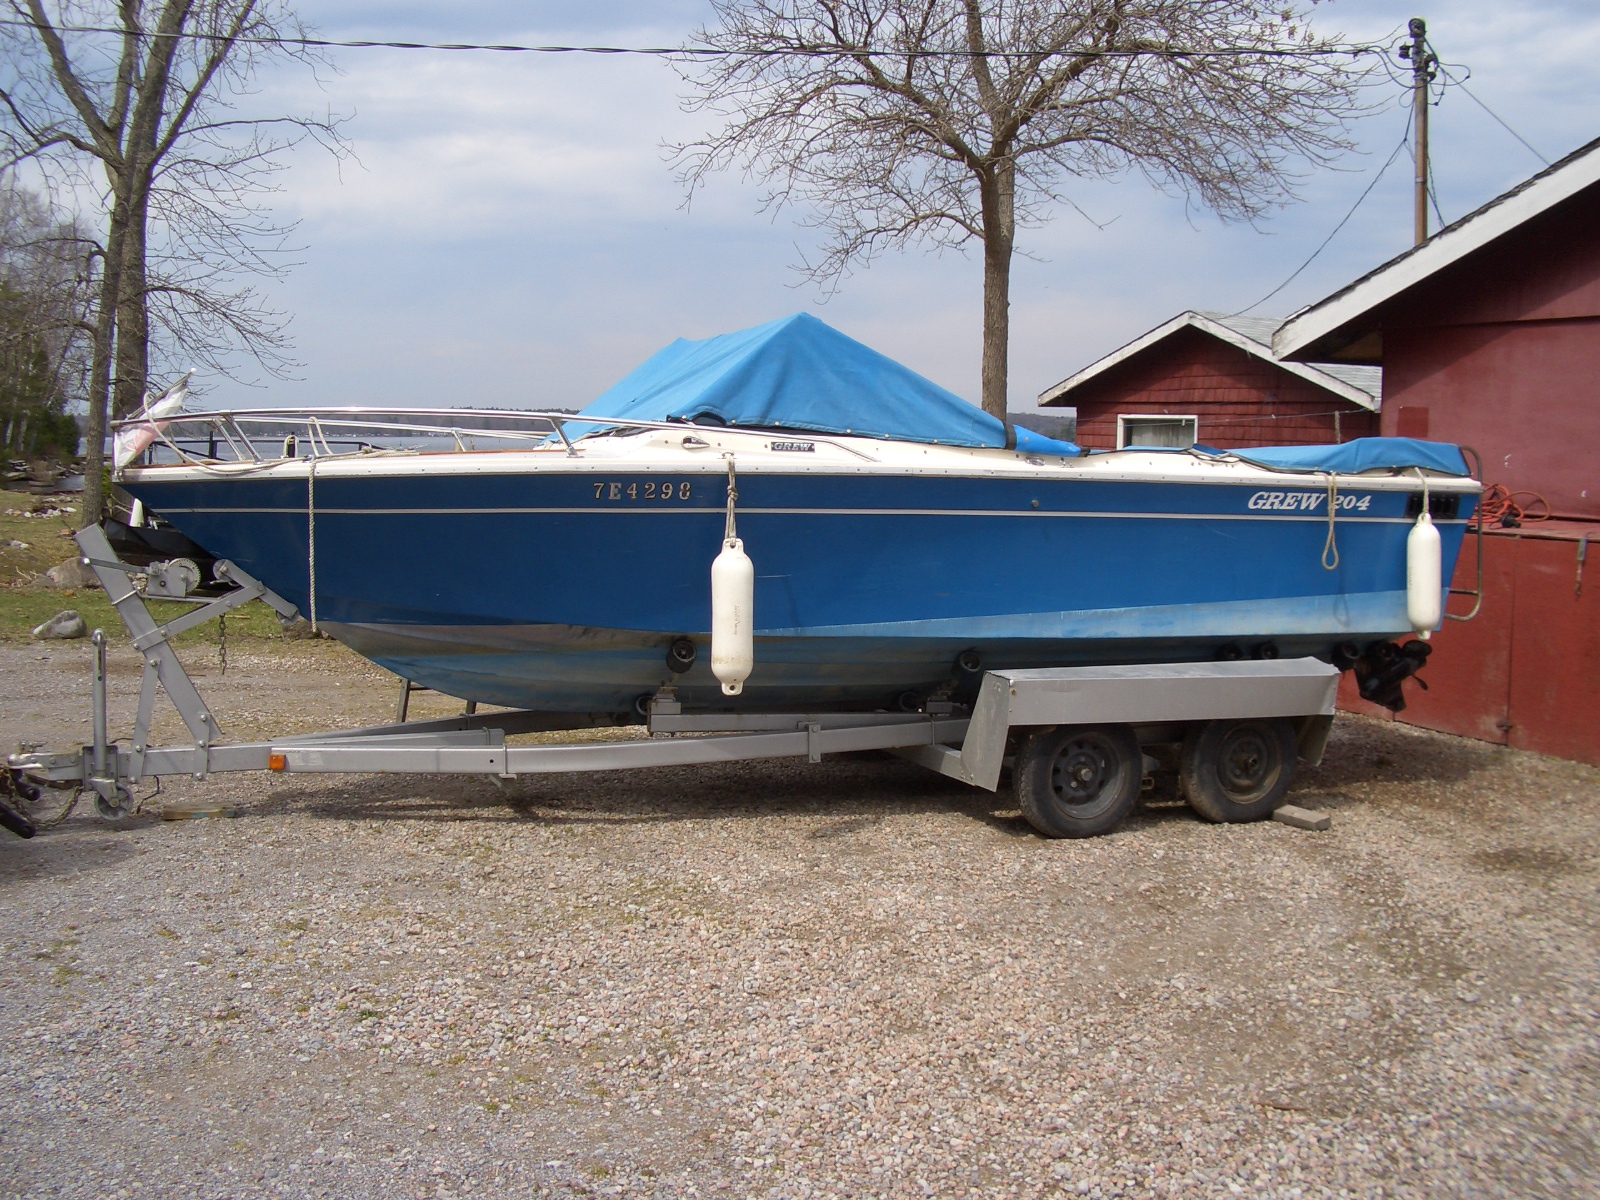 good condition overall, heavy water boat